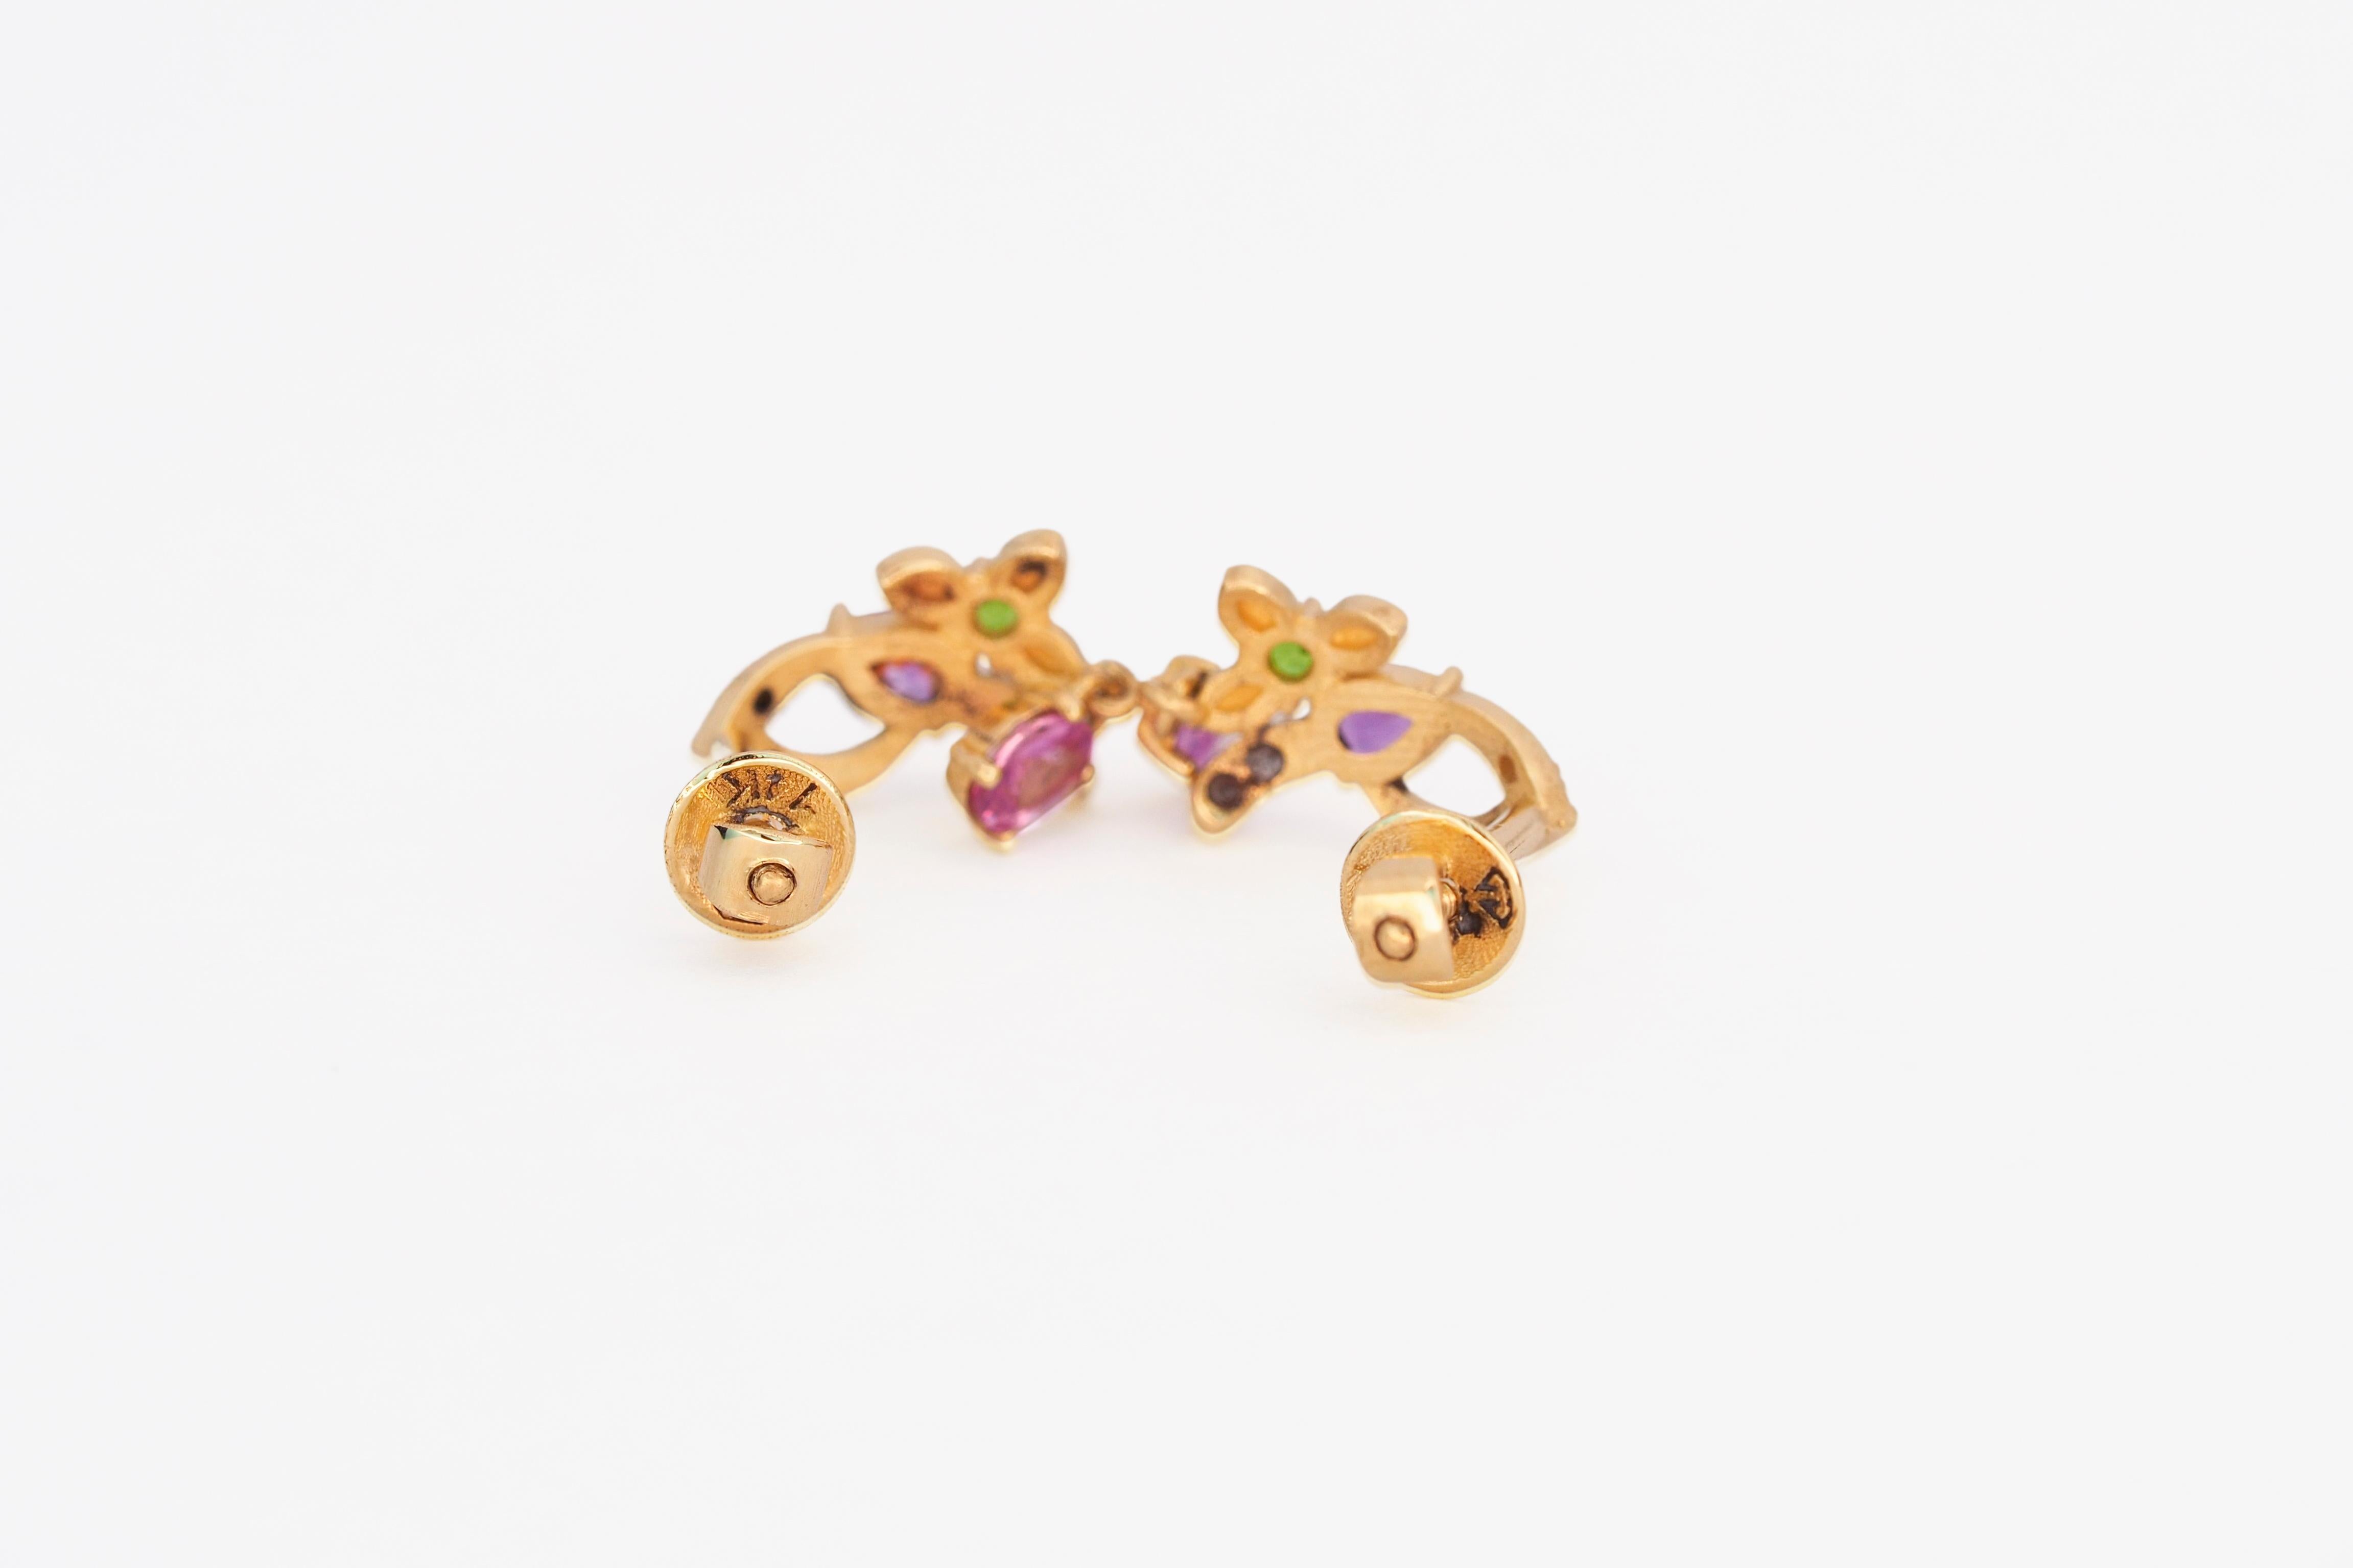 14 Karat Gold Earrings Studs with Sapphires and Multicolores Gemstones For Sale 3